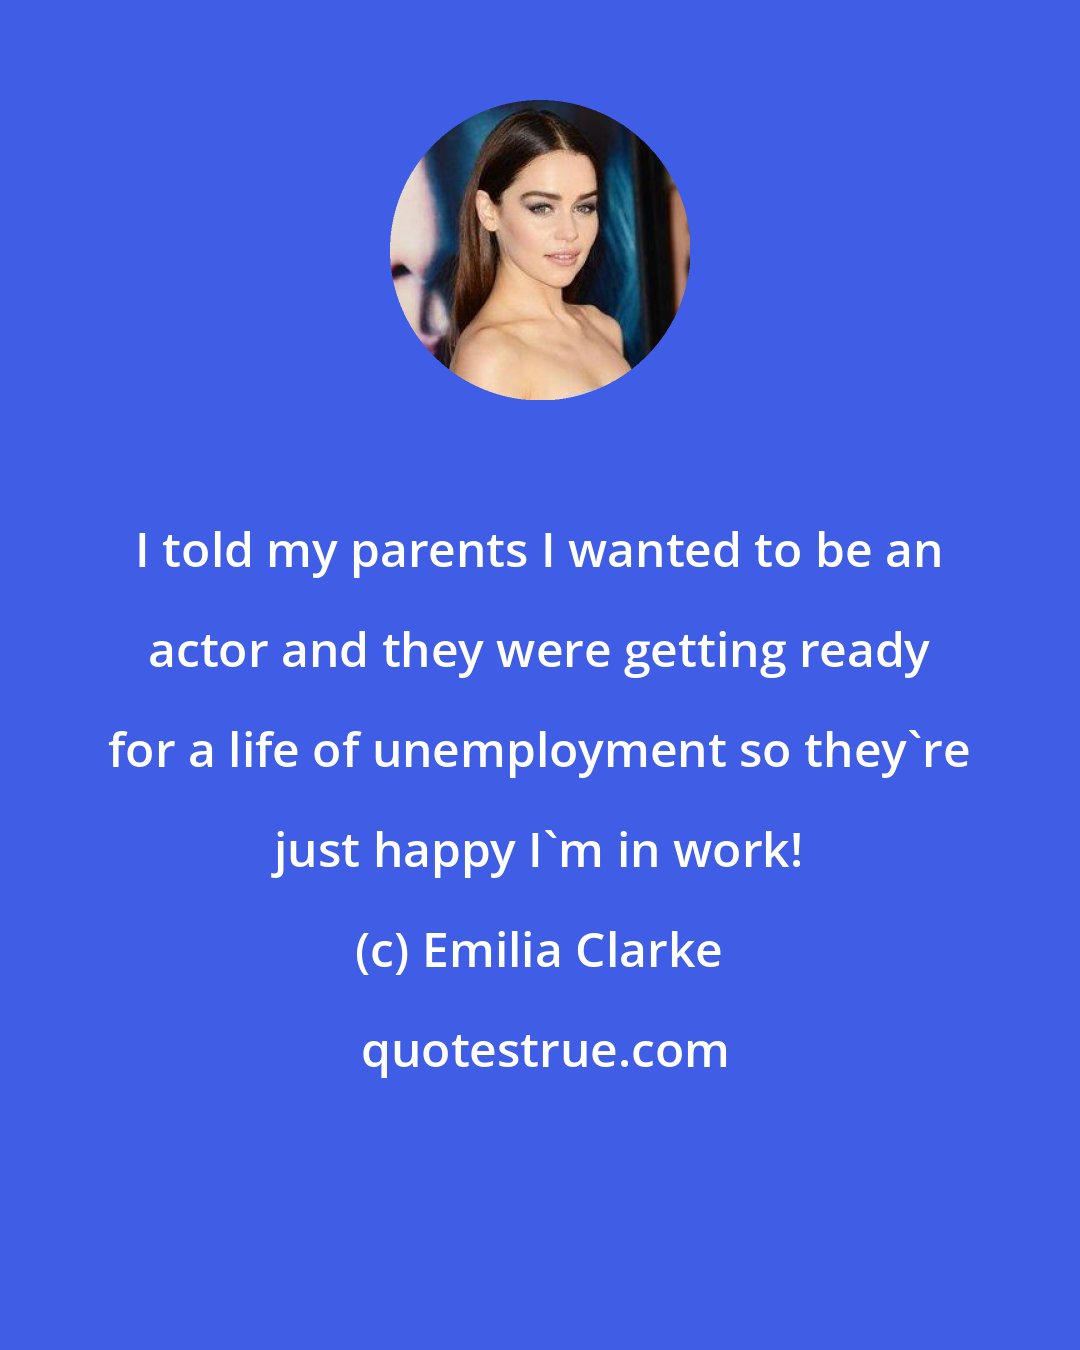 Emilia Clarke: I told my parents I wanted to be an actor and they were getting ready for a life of unemployment so they're just happy I'm in work!